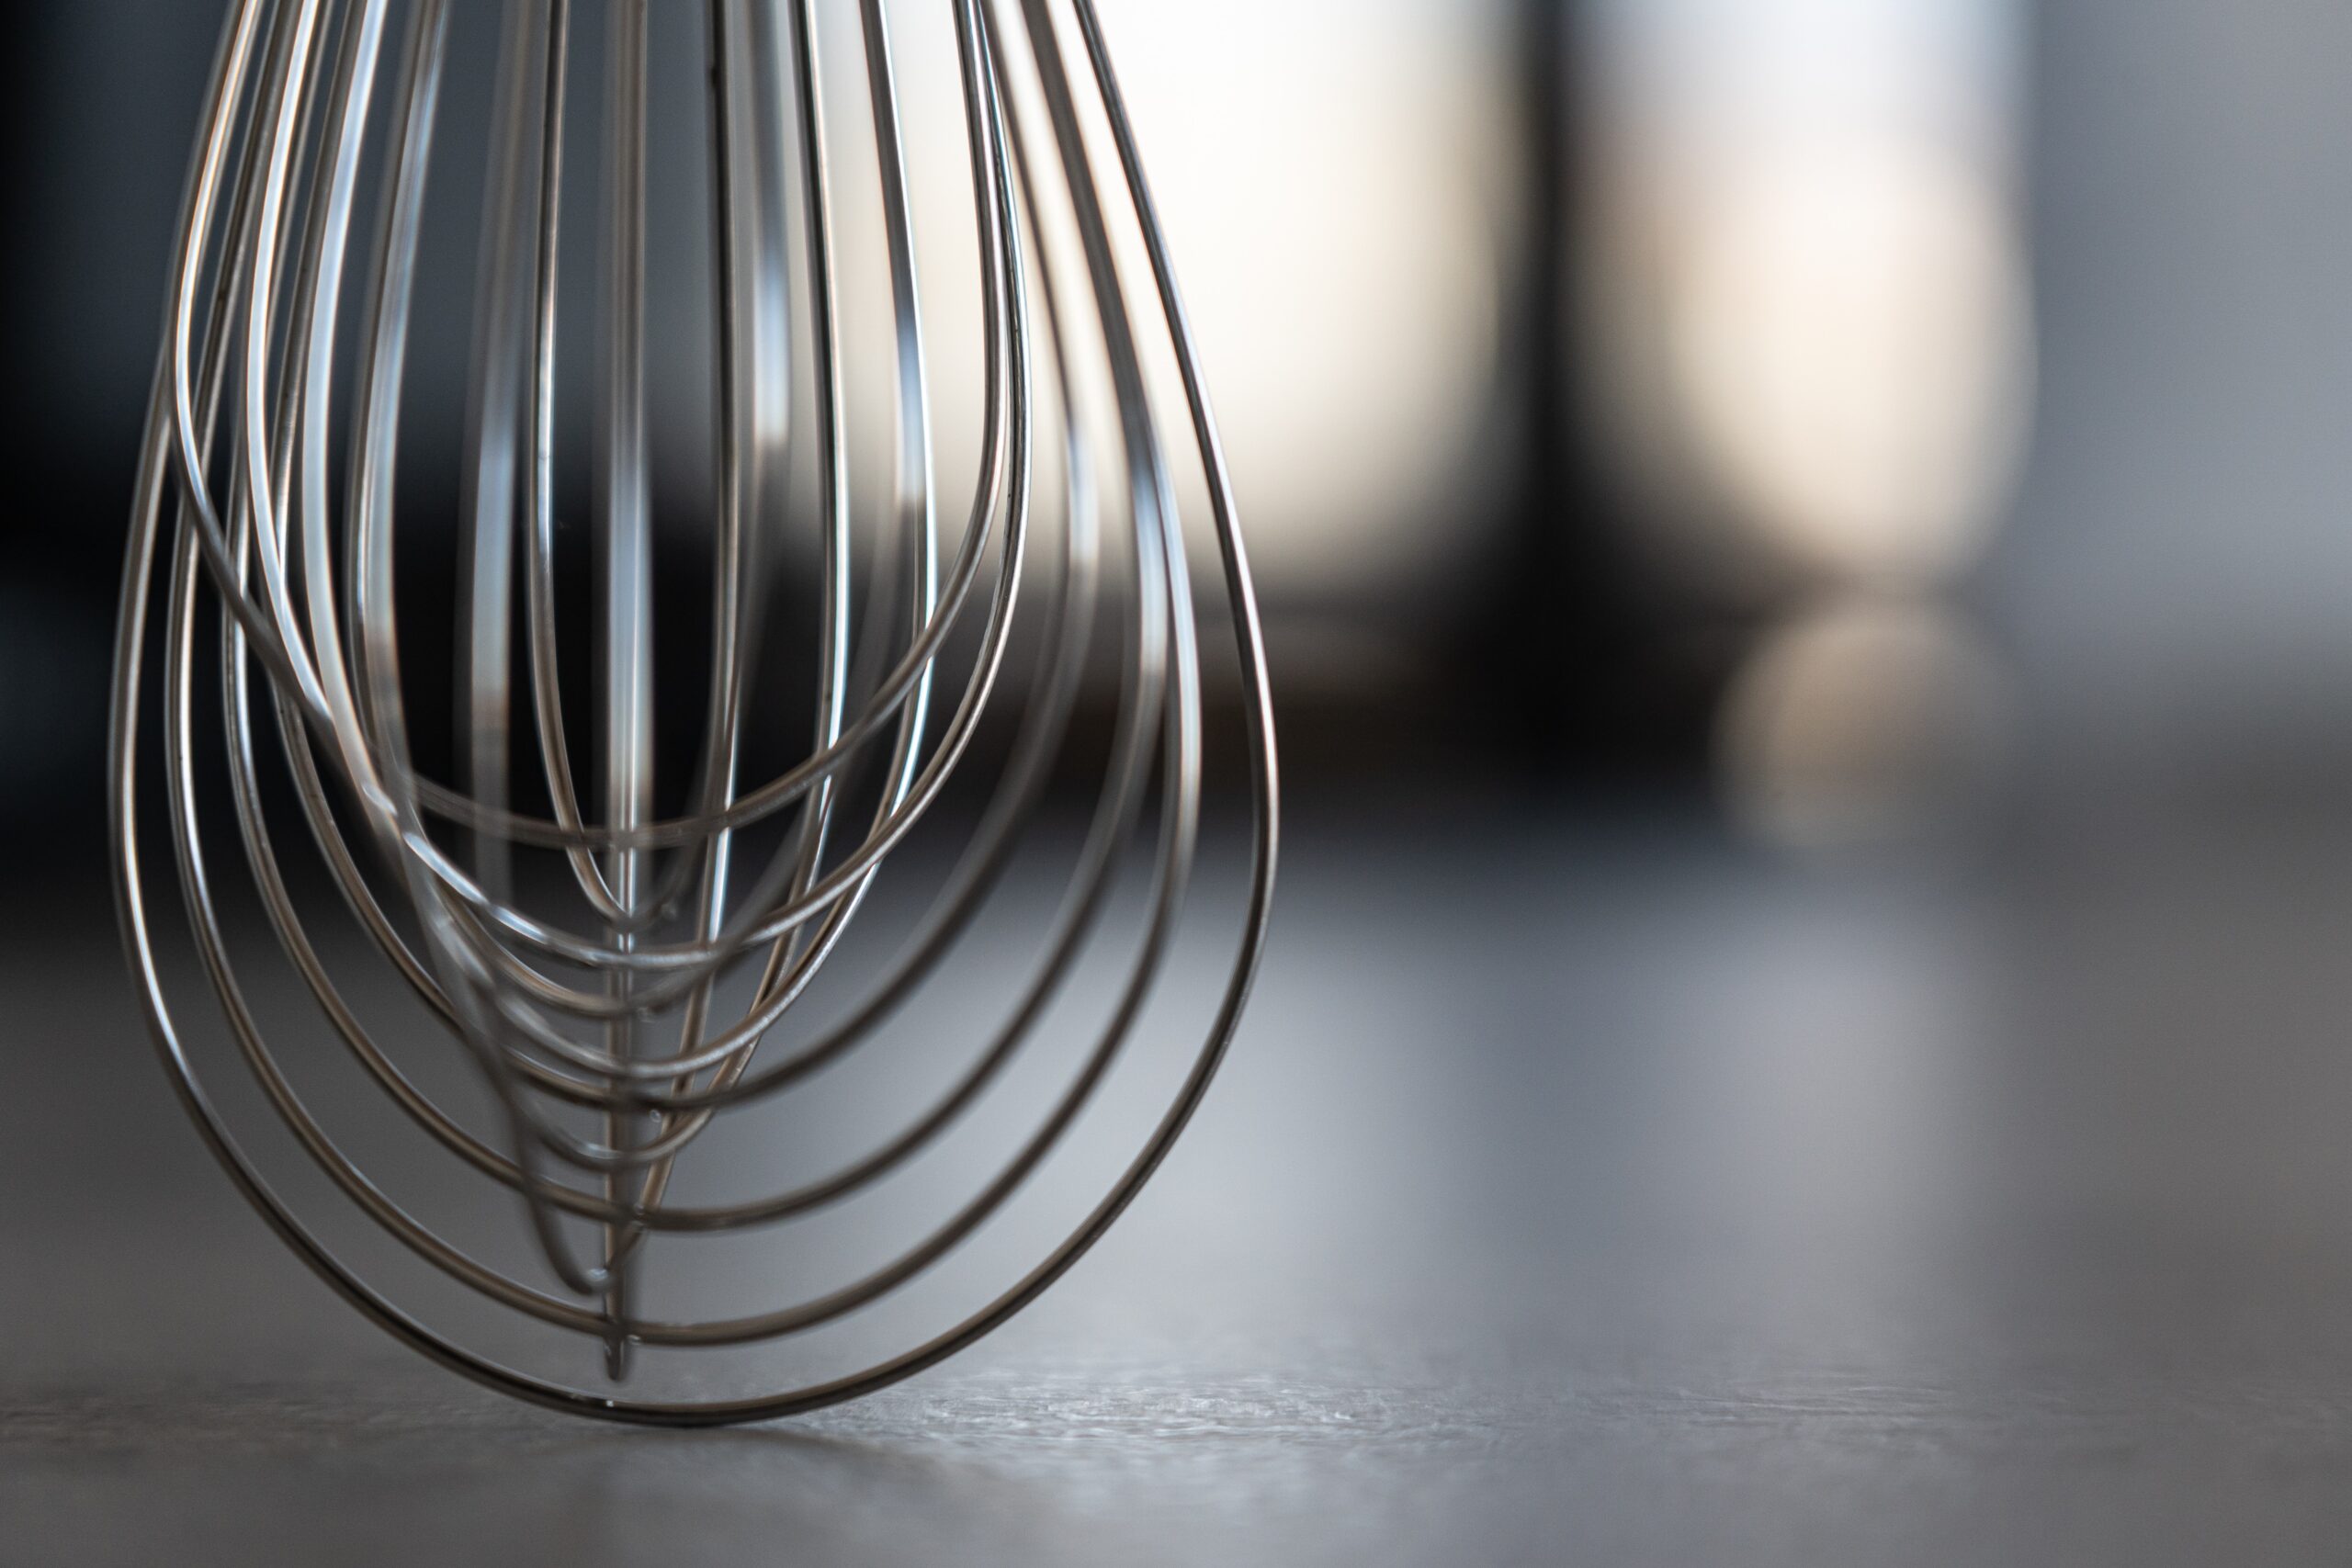 What is the best material for kitchen utensils?